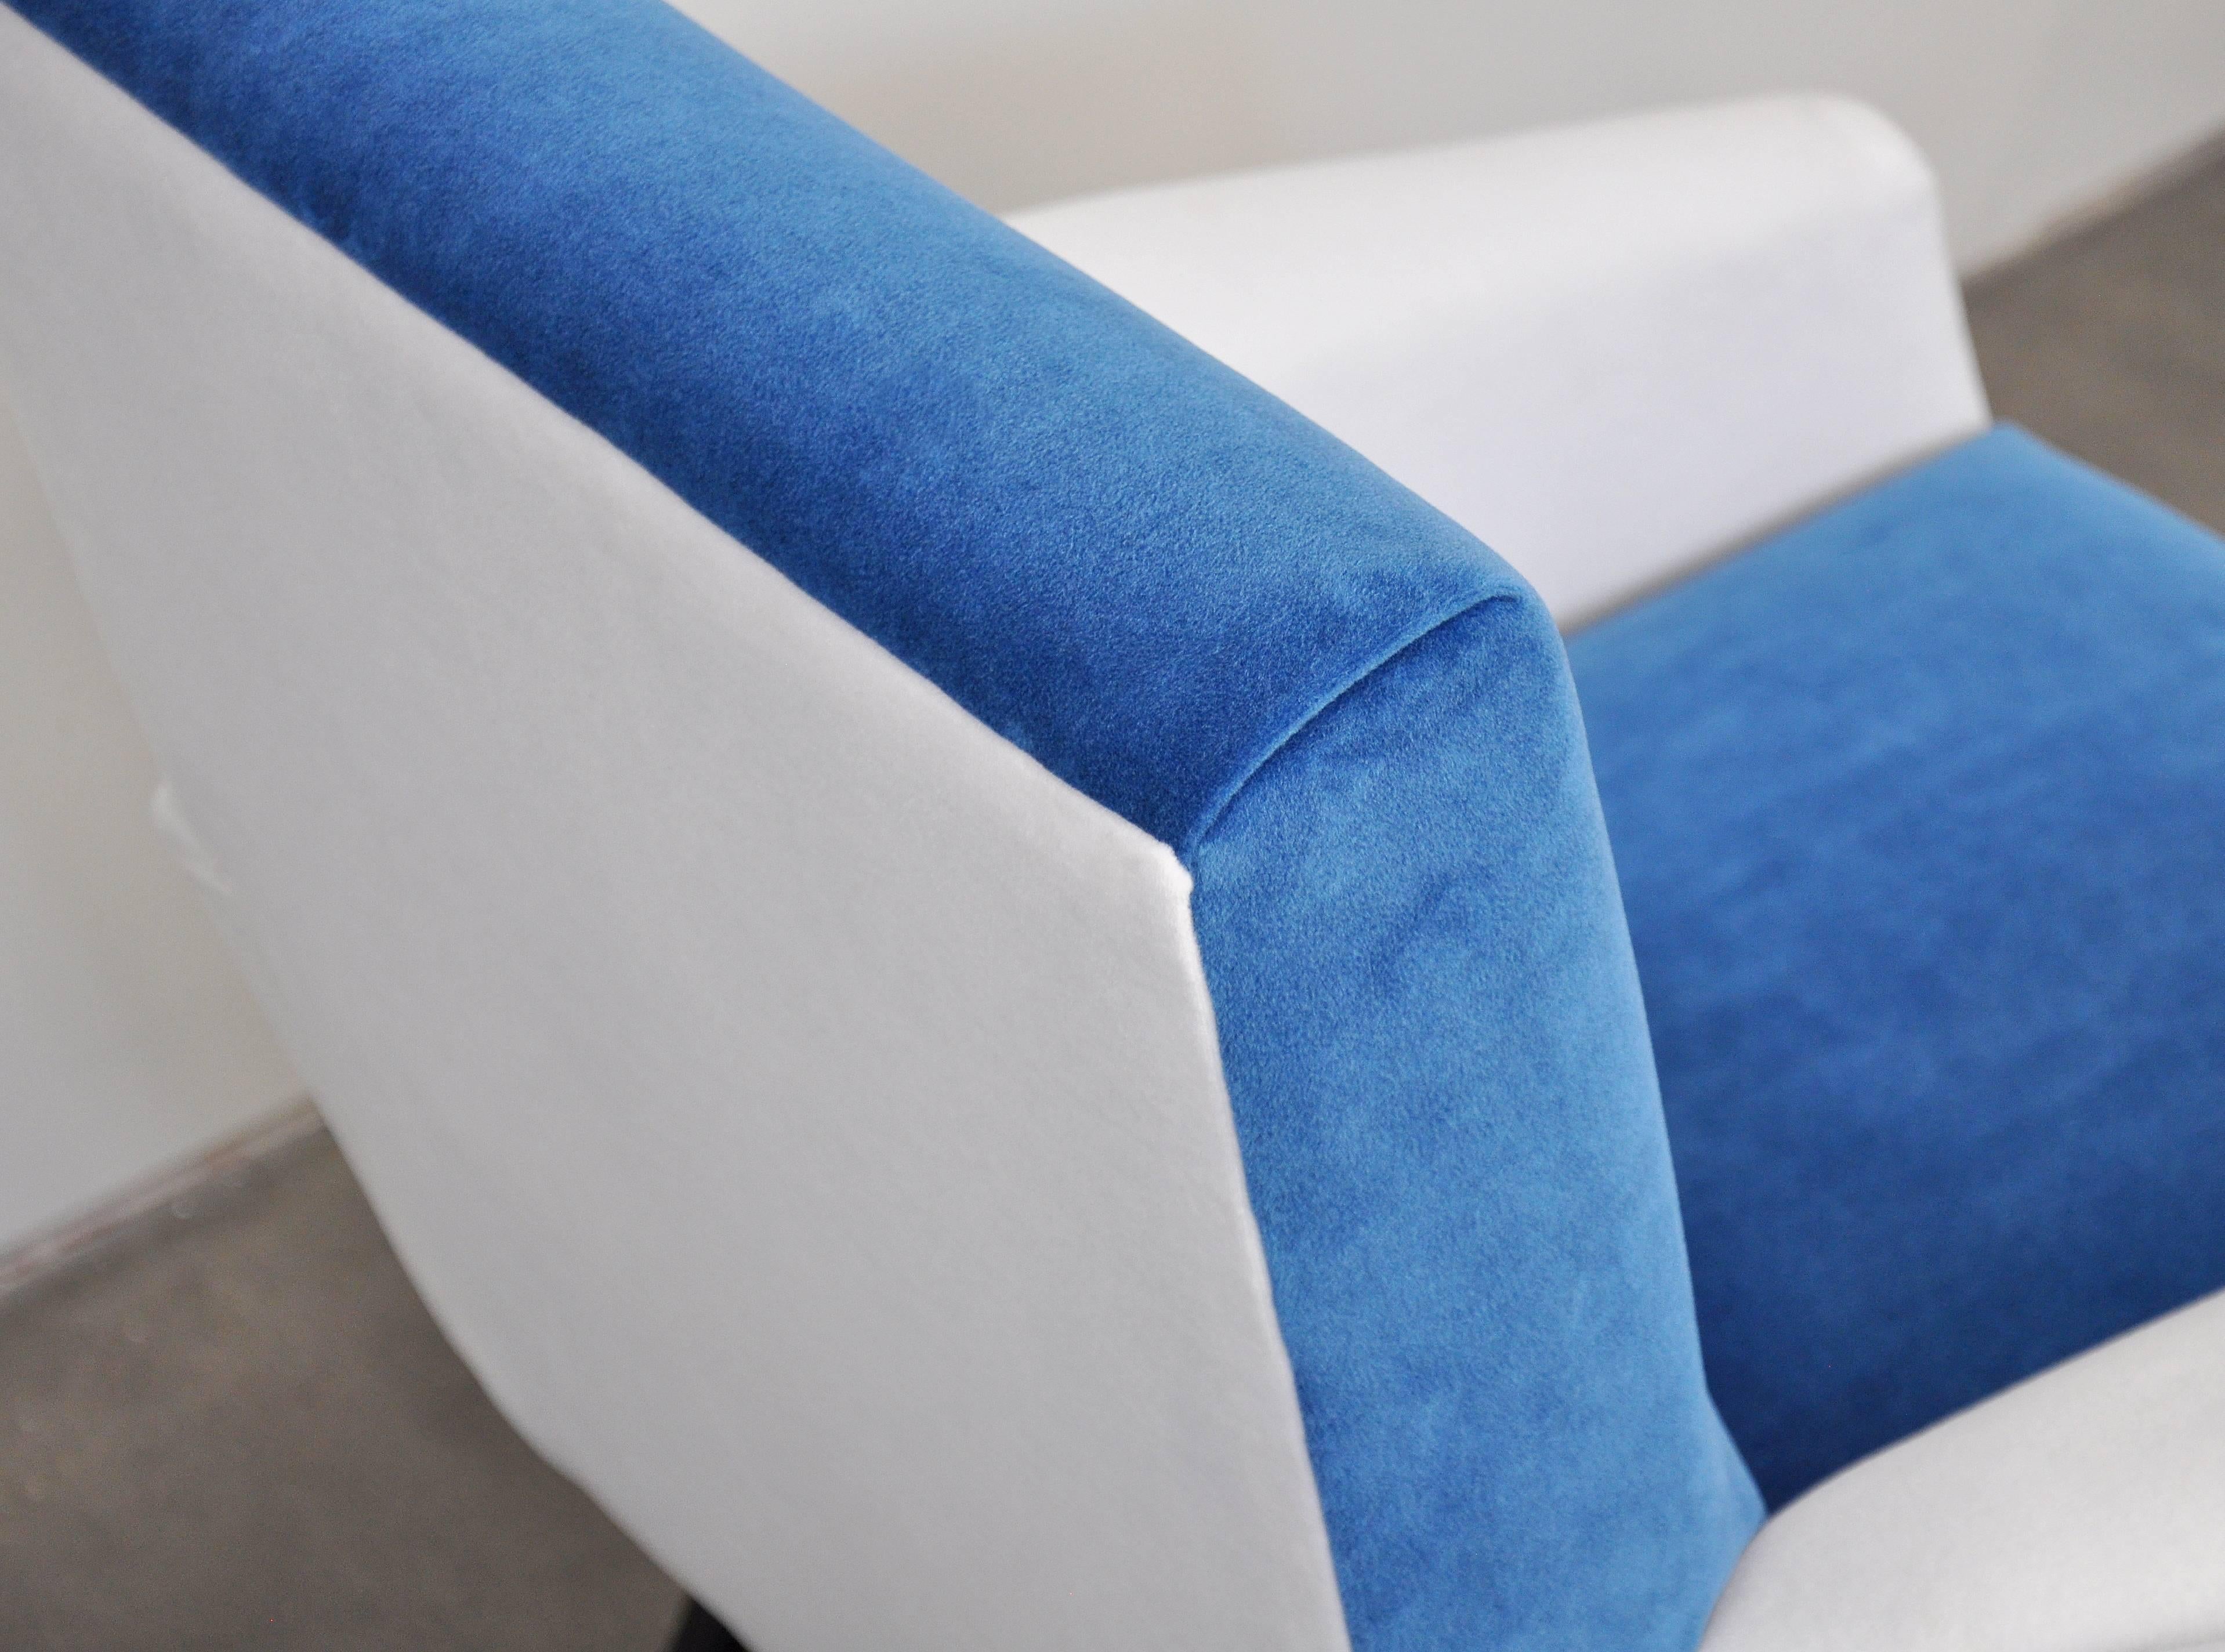 Italian Marco Zanuso Style Blue and White Velvet Lounge Chairs, 1950s